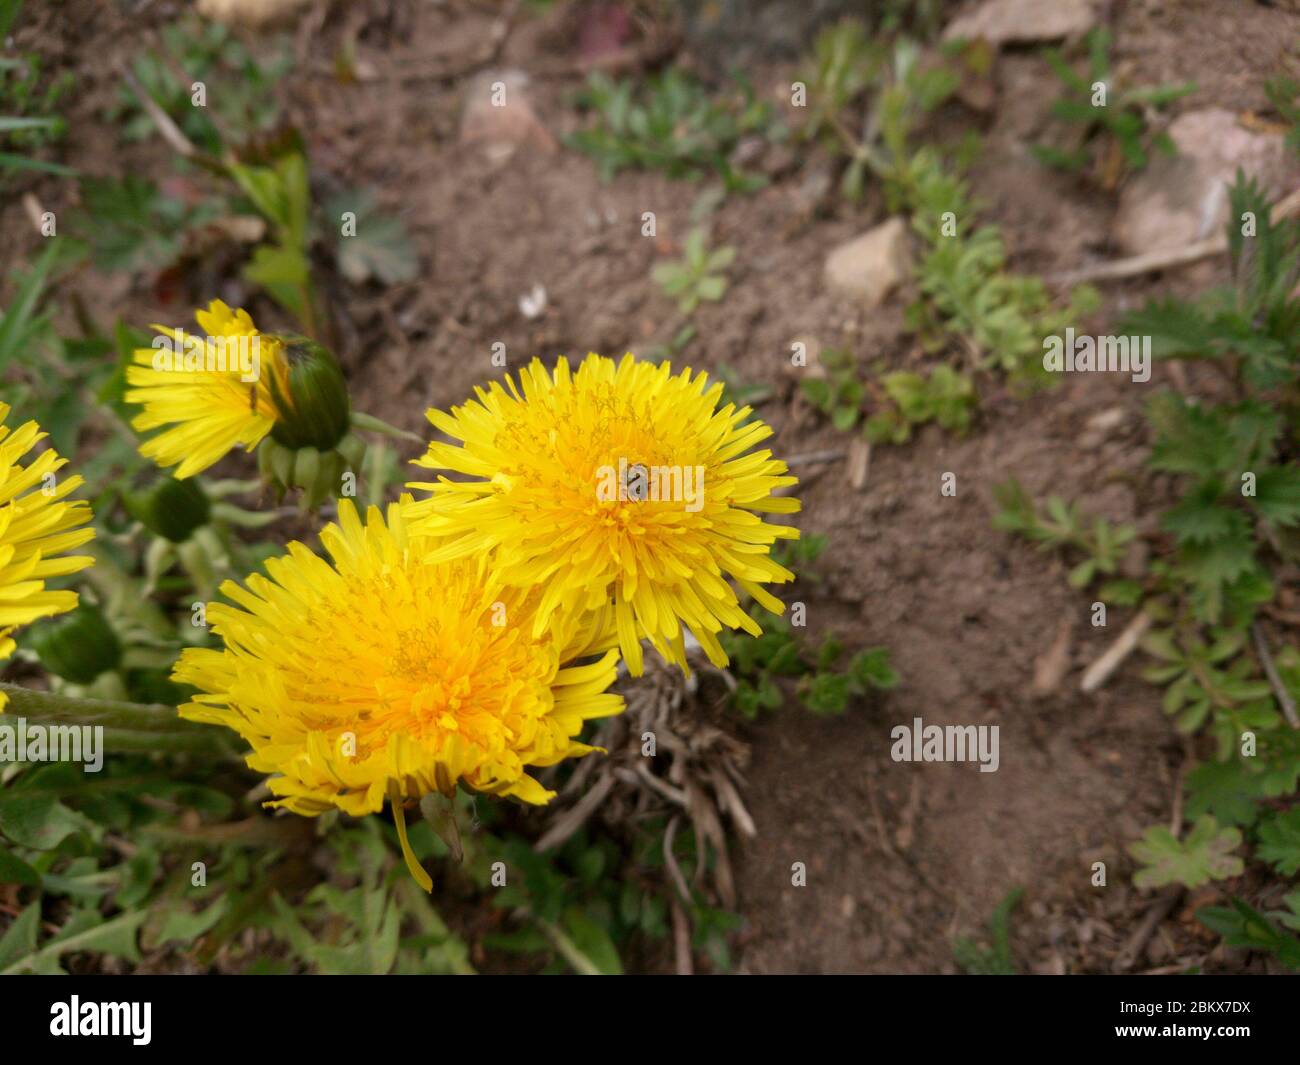 Macro Photo of a dandelion plant. Dandelion plant with a fluffy yellow bud. Yellow dandelion flower growing in the ground. Stock Photo